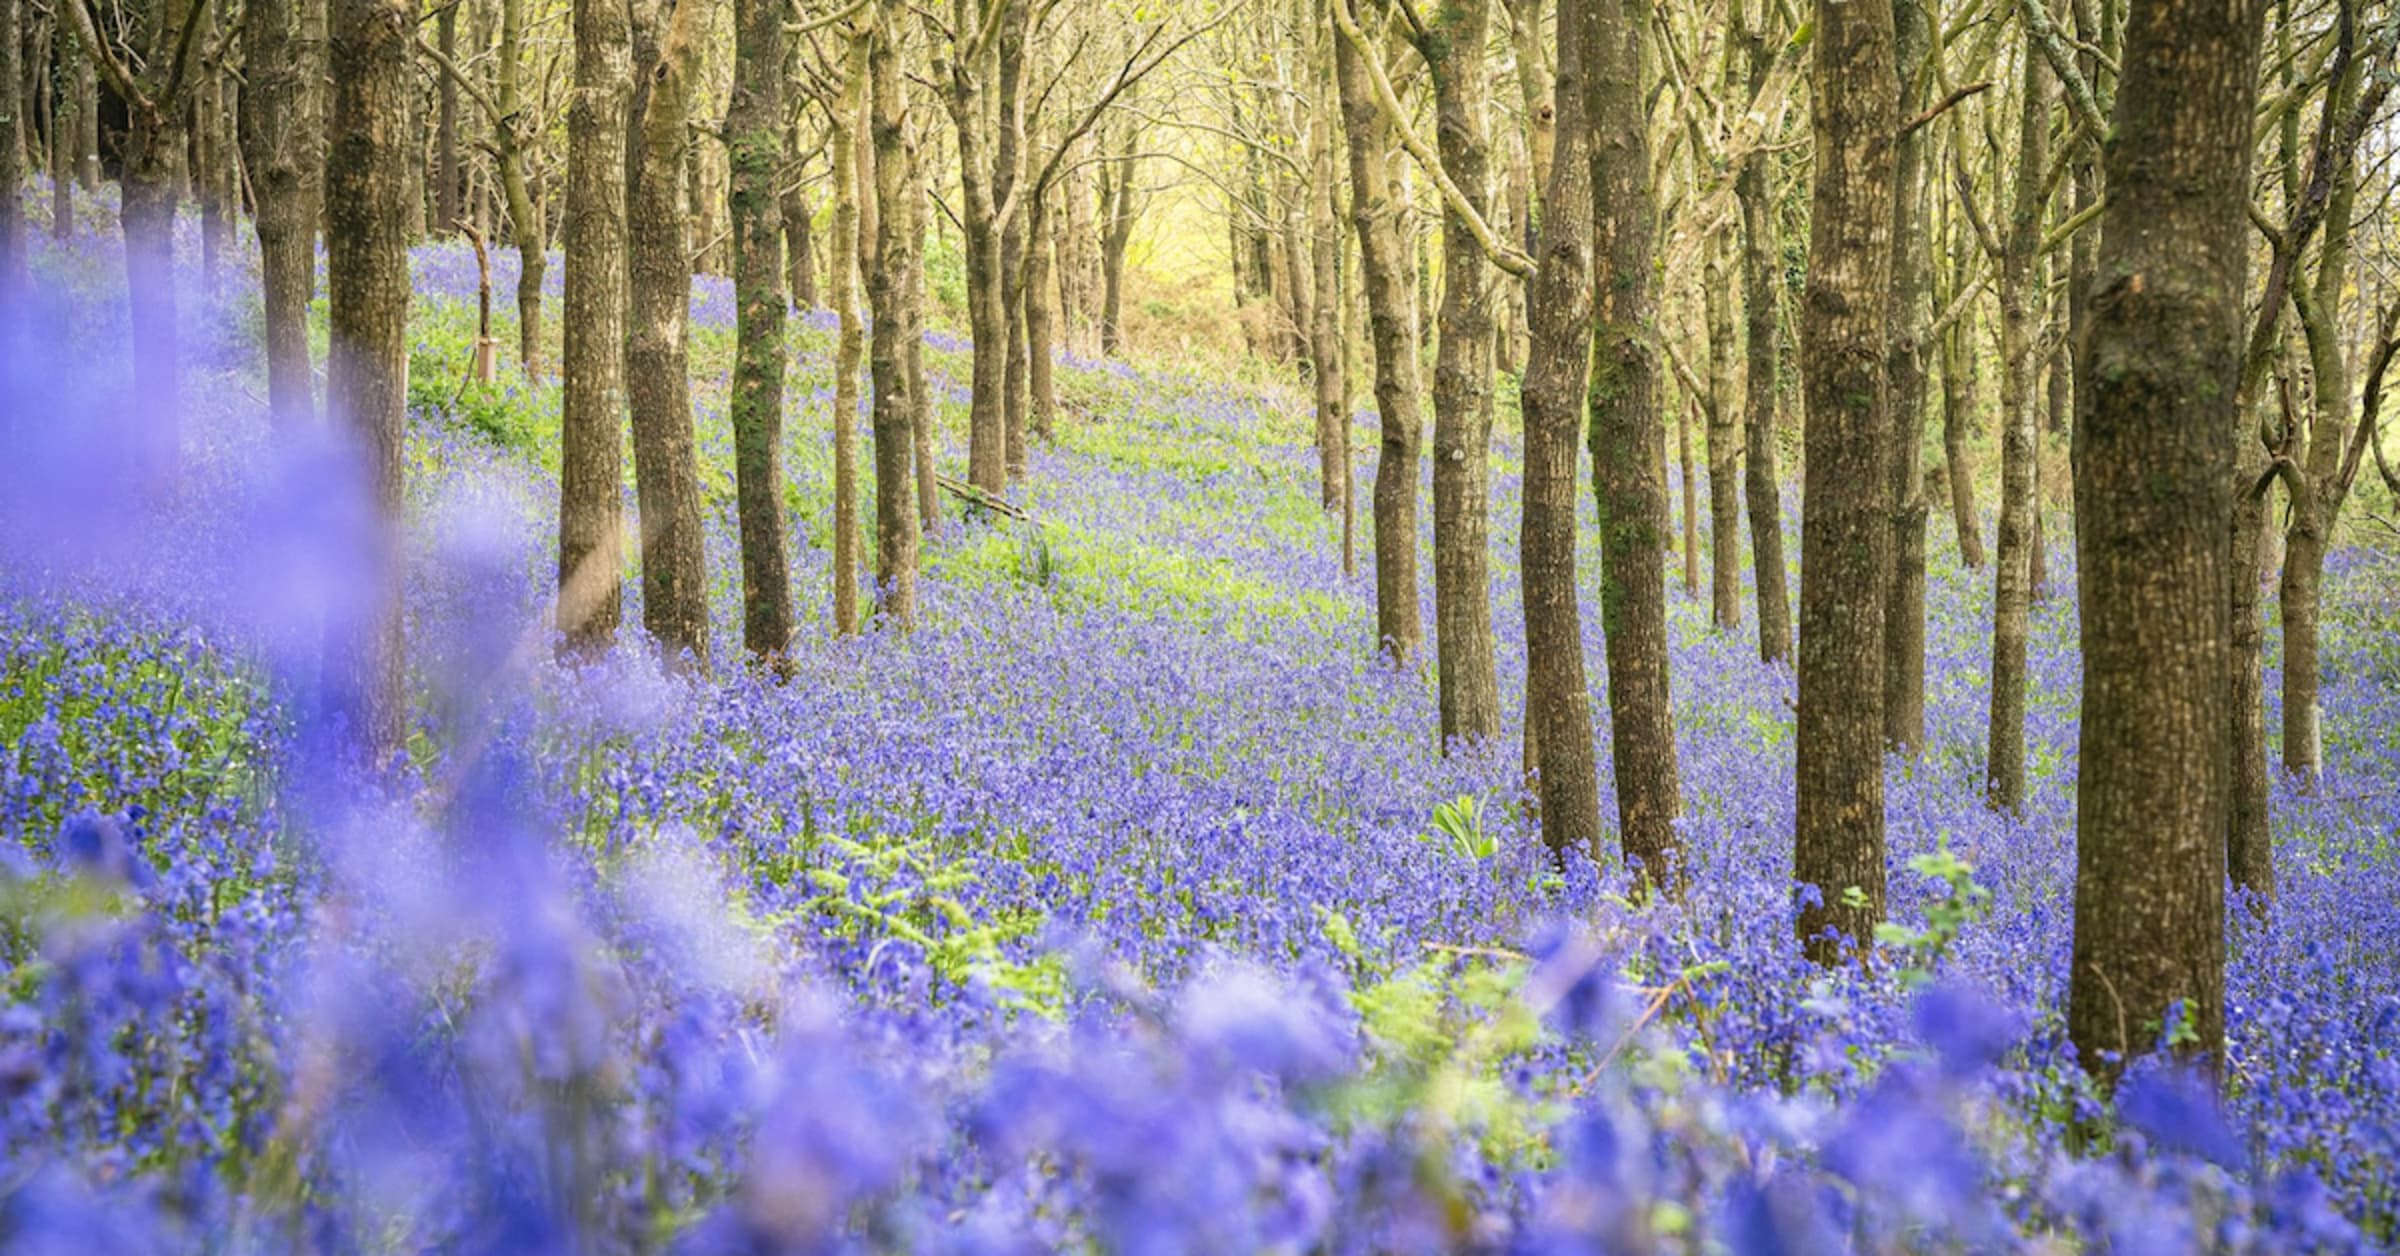 Bluebell woods in England